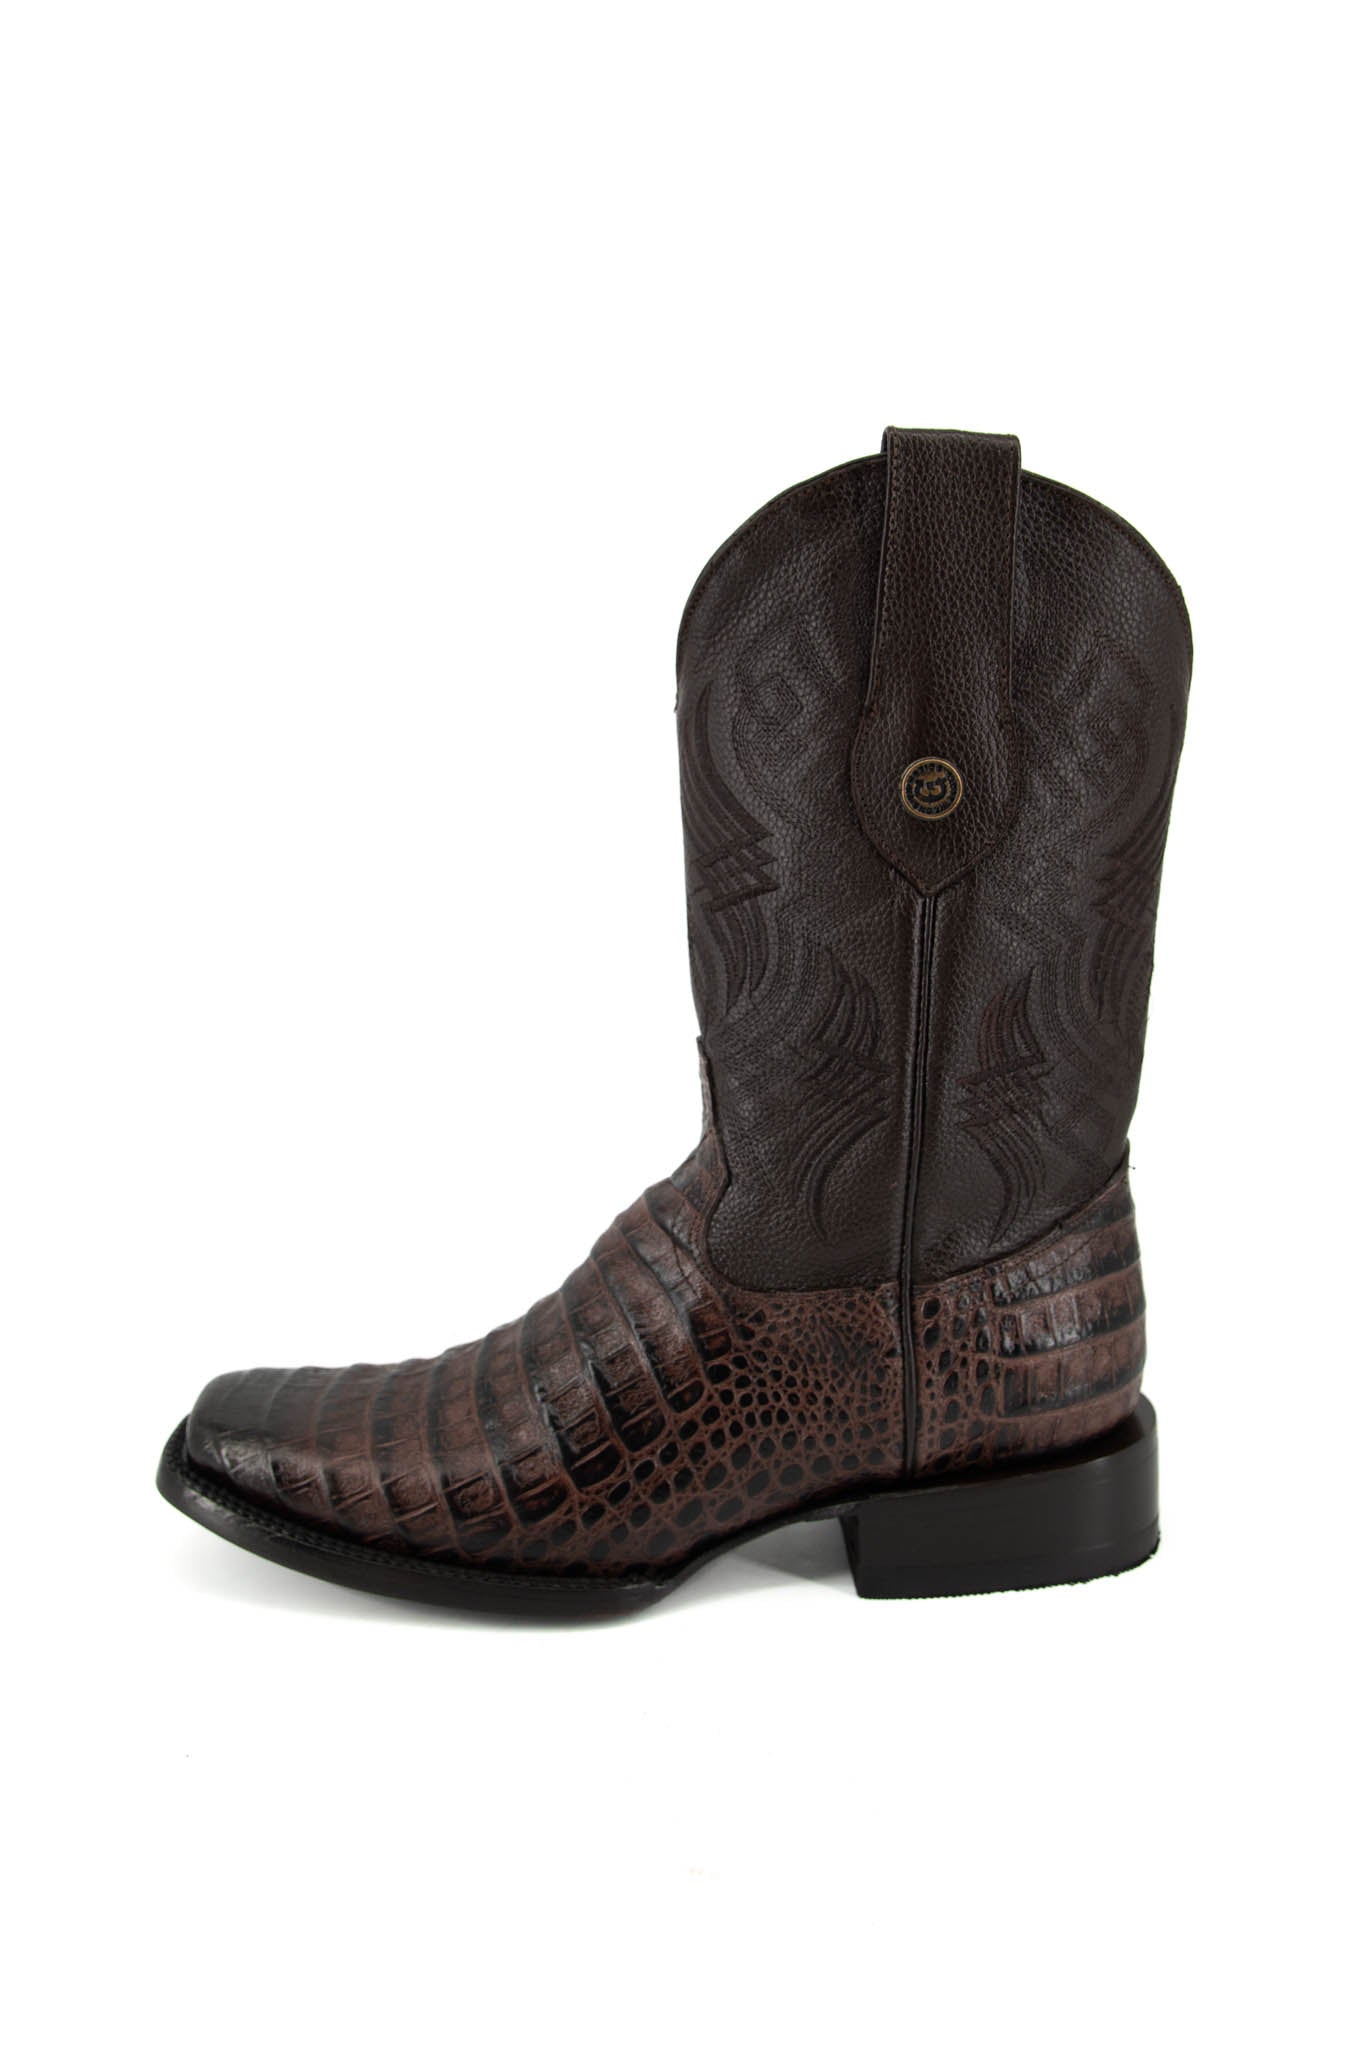 Coco Belly Rodeo Toe Cowboy Boot